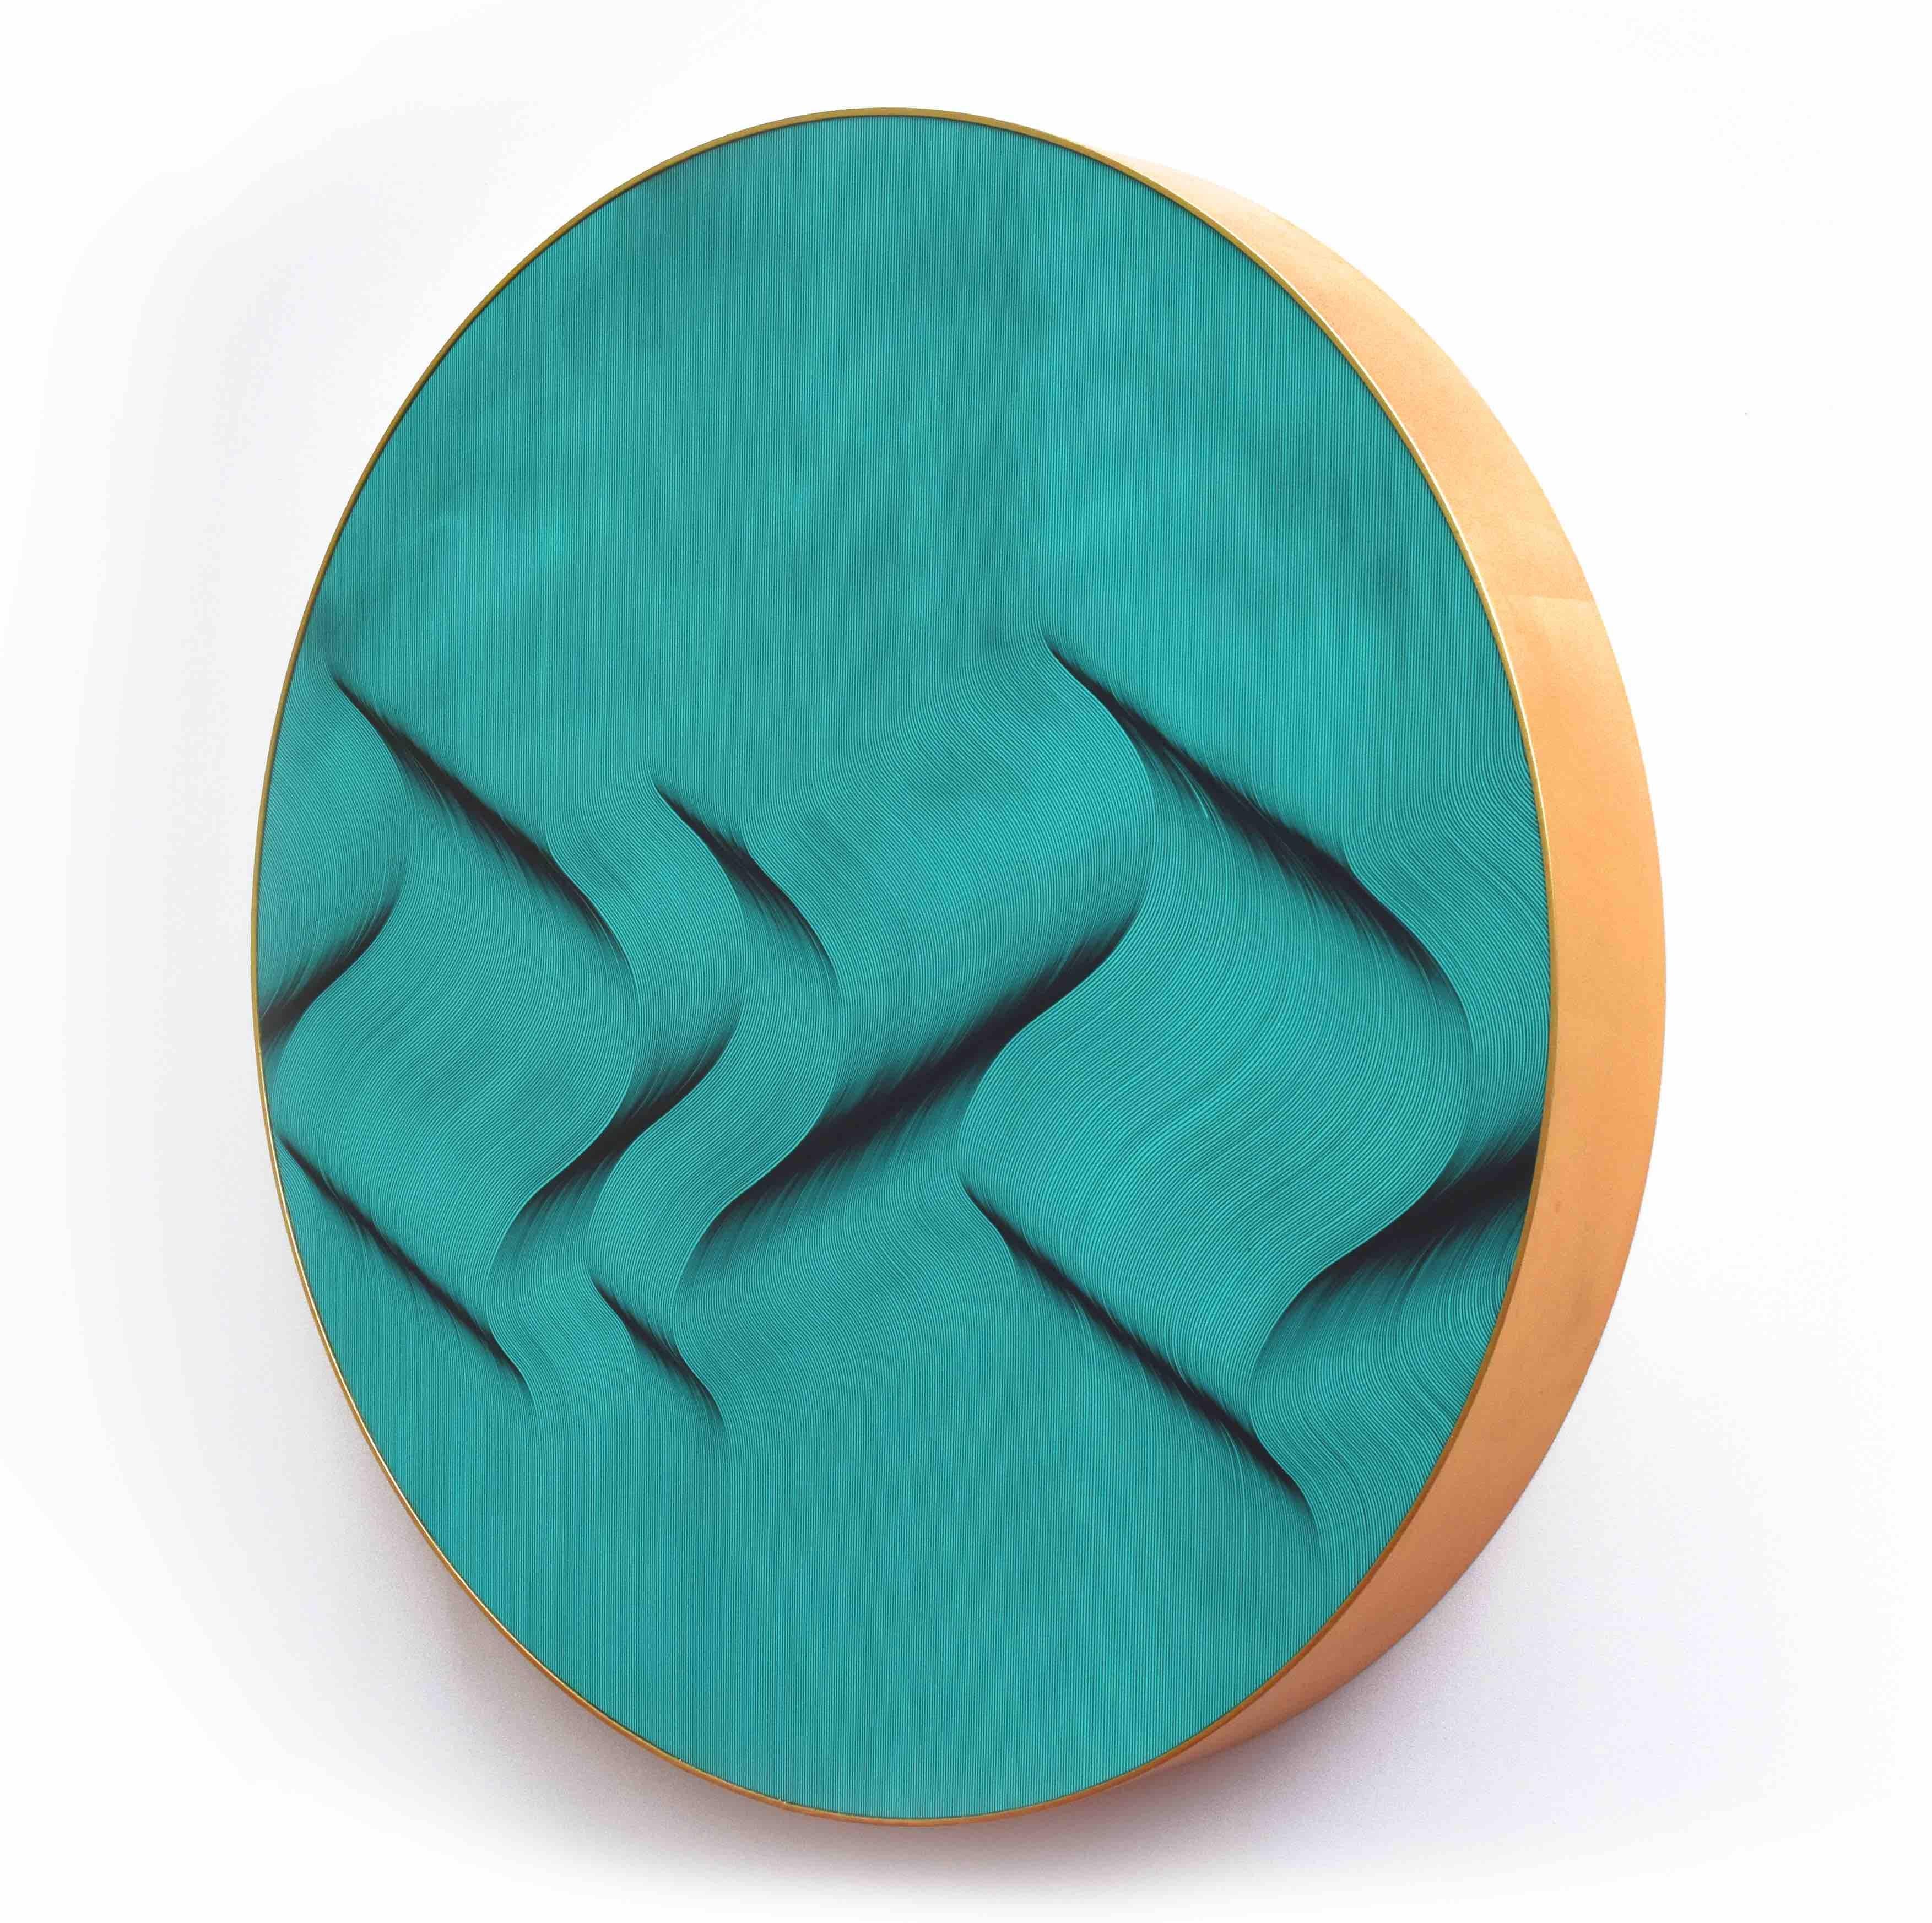 Roberto Lucchetta Abstract Painting - Turquoise wave 2021 - geometric abstract painting